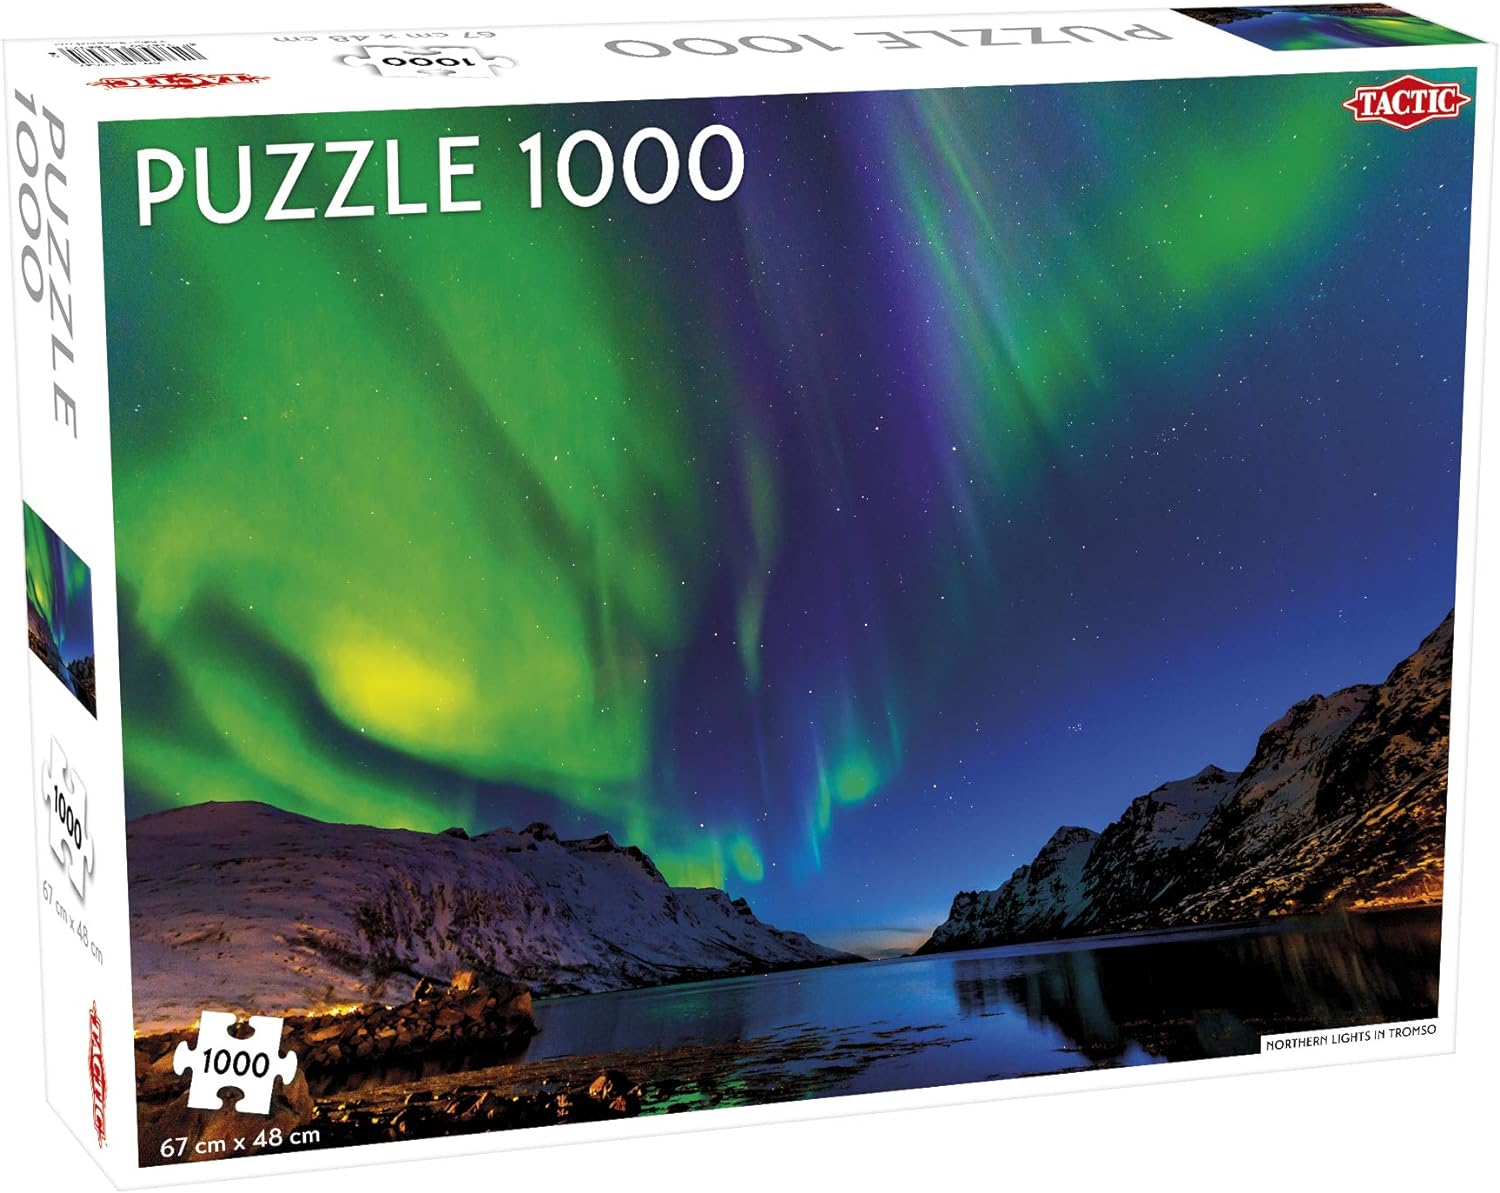 Tactic Northern Lights in Tromso Jigsaw Puzzle - 1000 Pieces